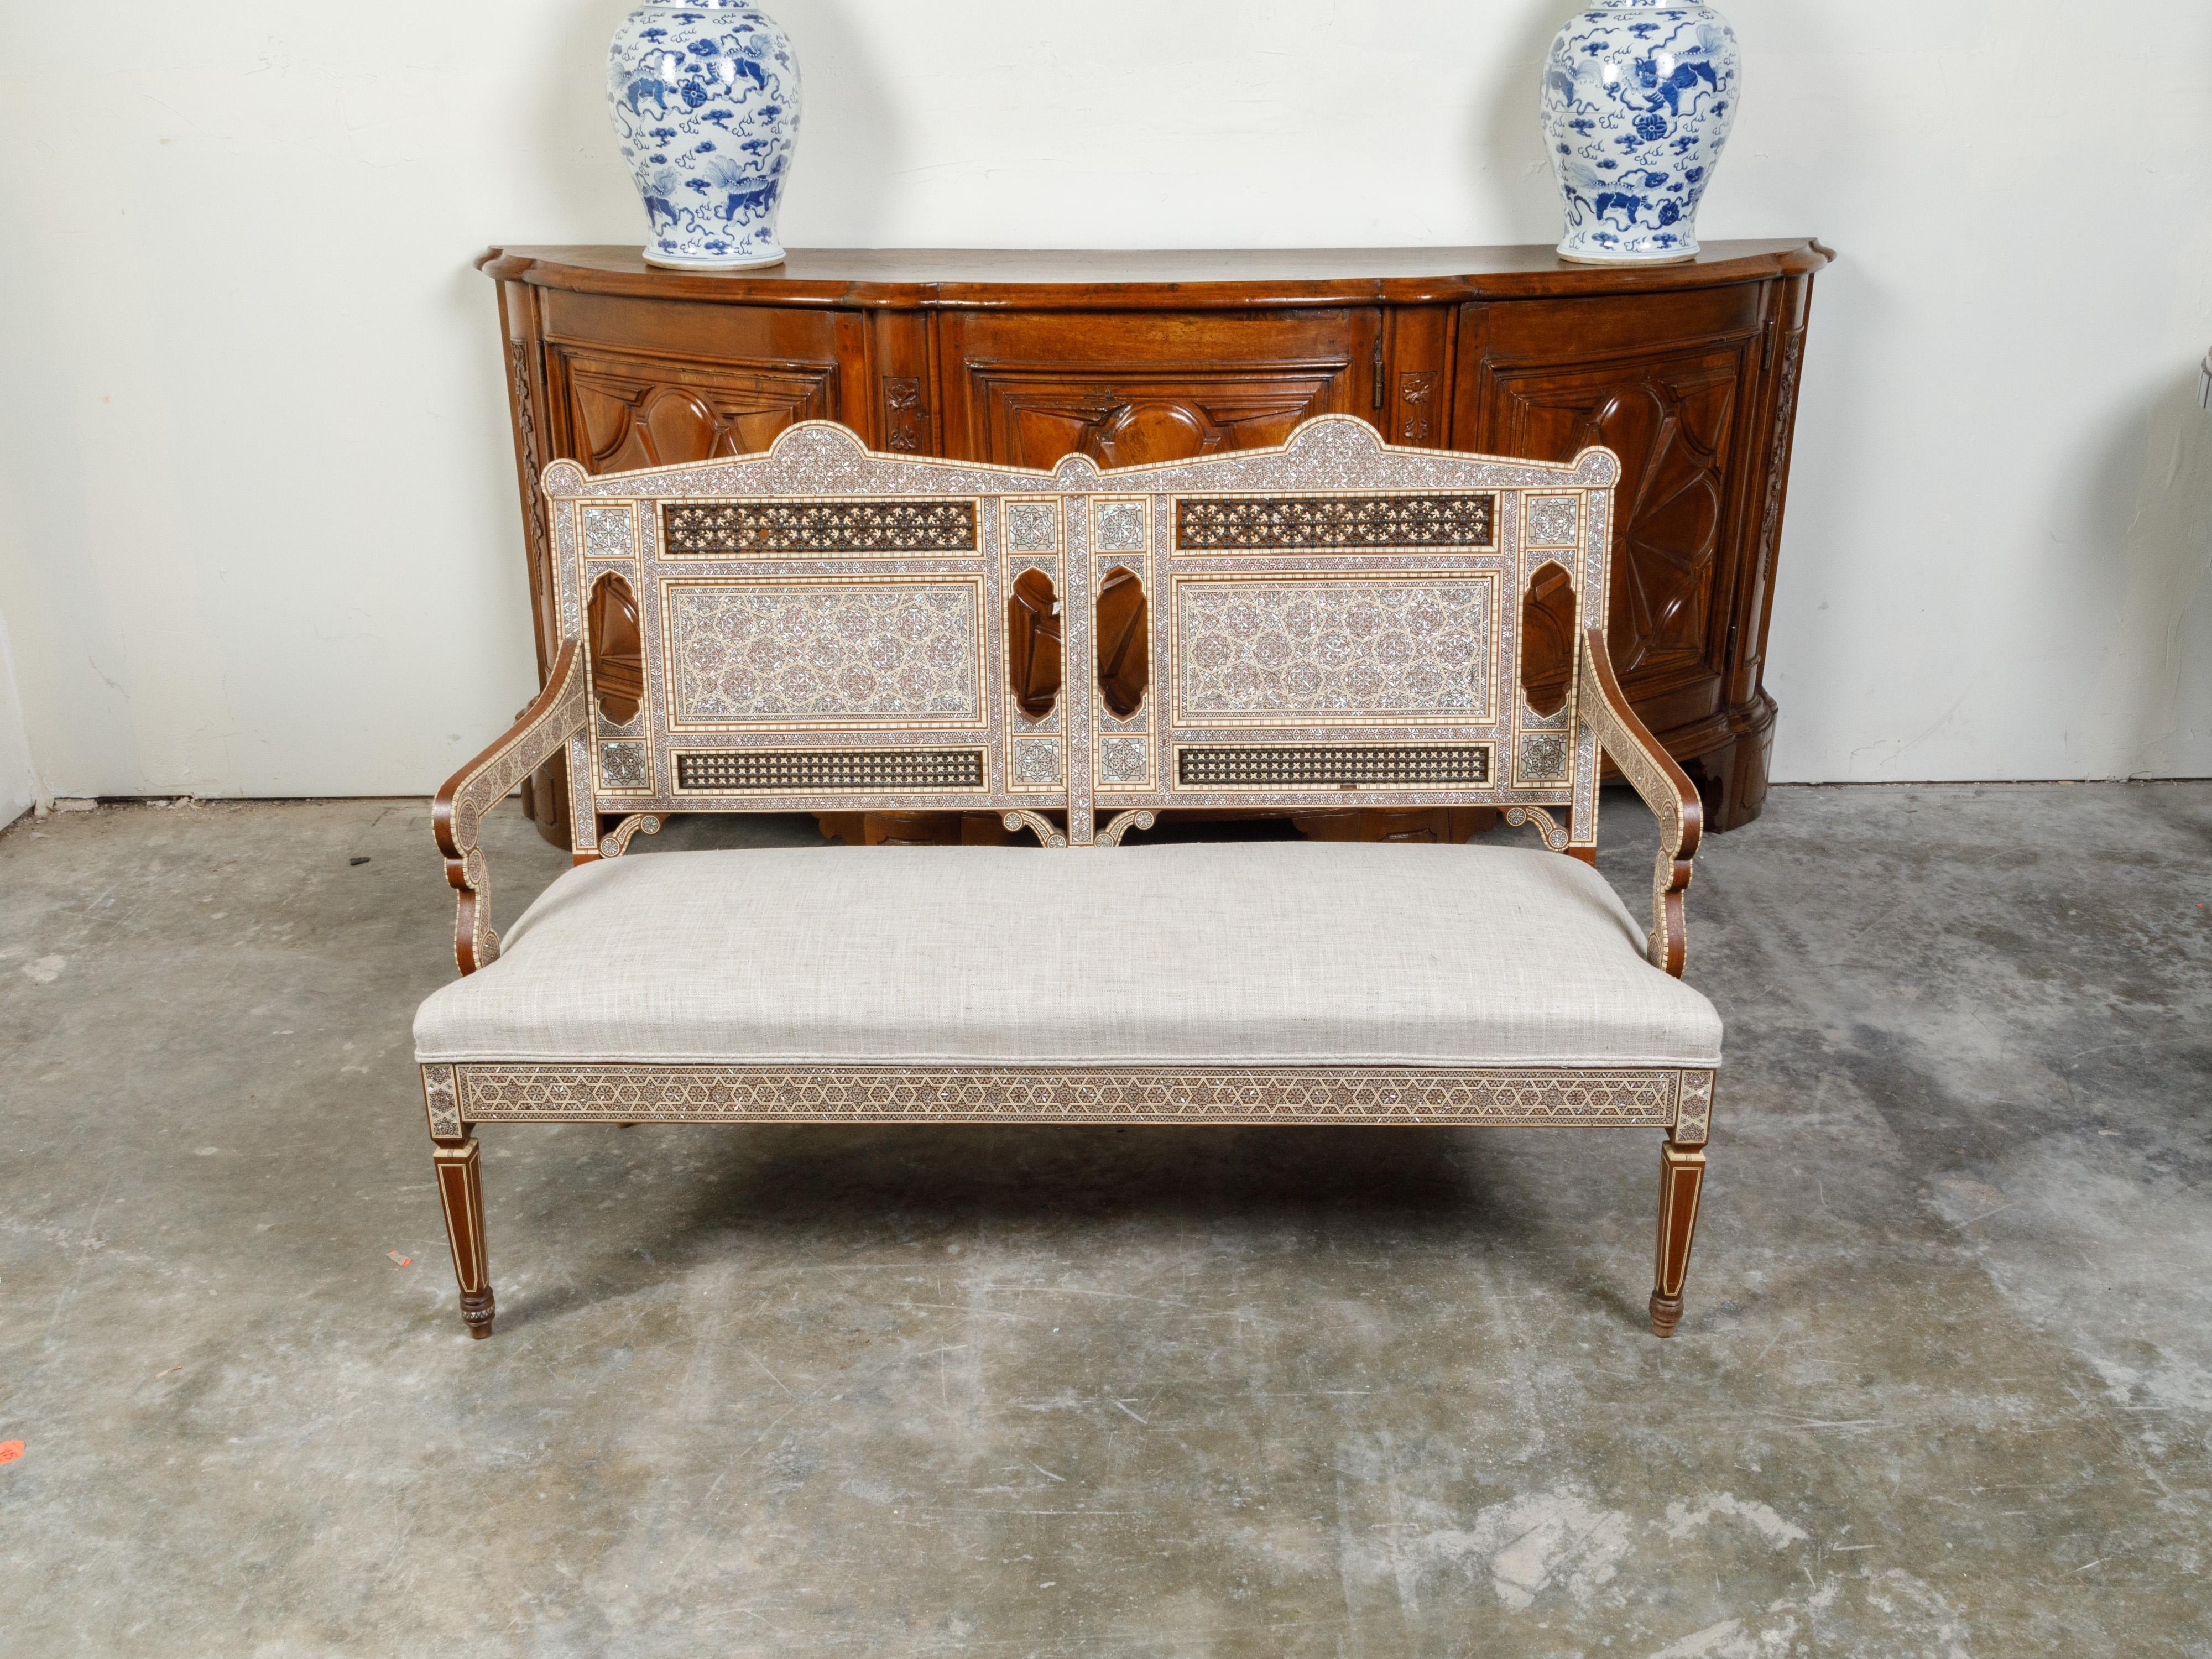 A Moroccan settee from the mid 20th century, with geometric mother-of-pearl inlay and new linen upholstery. Created in Morocco during the Midcentury period, this settee captures our attention with its stunning back adorned with an abundant décor of